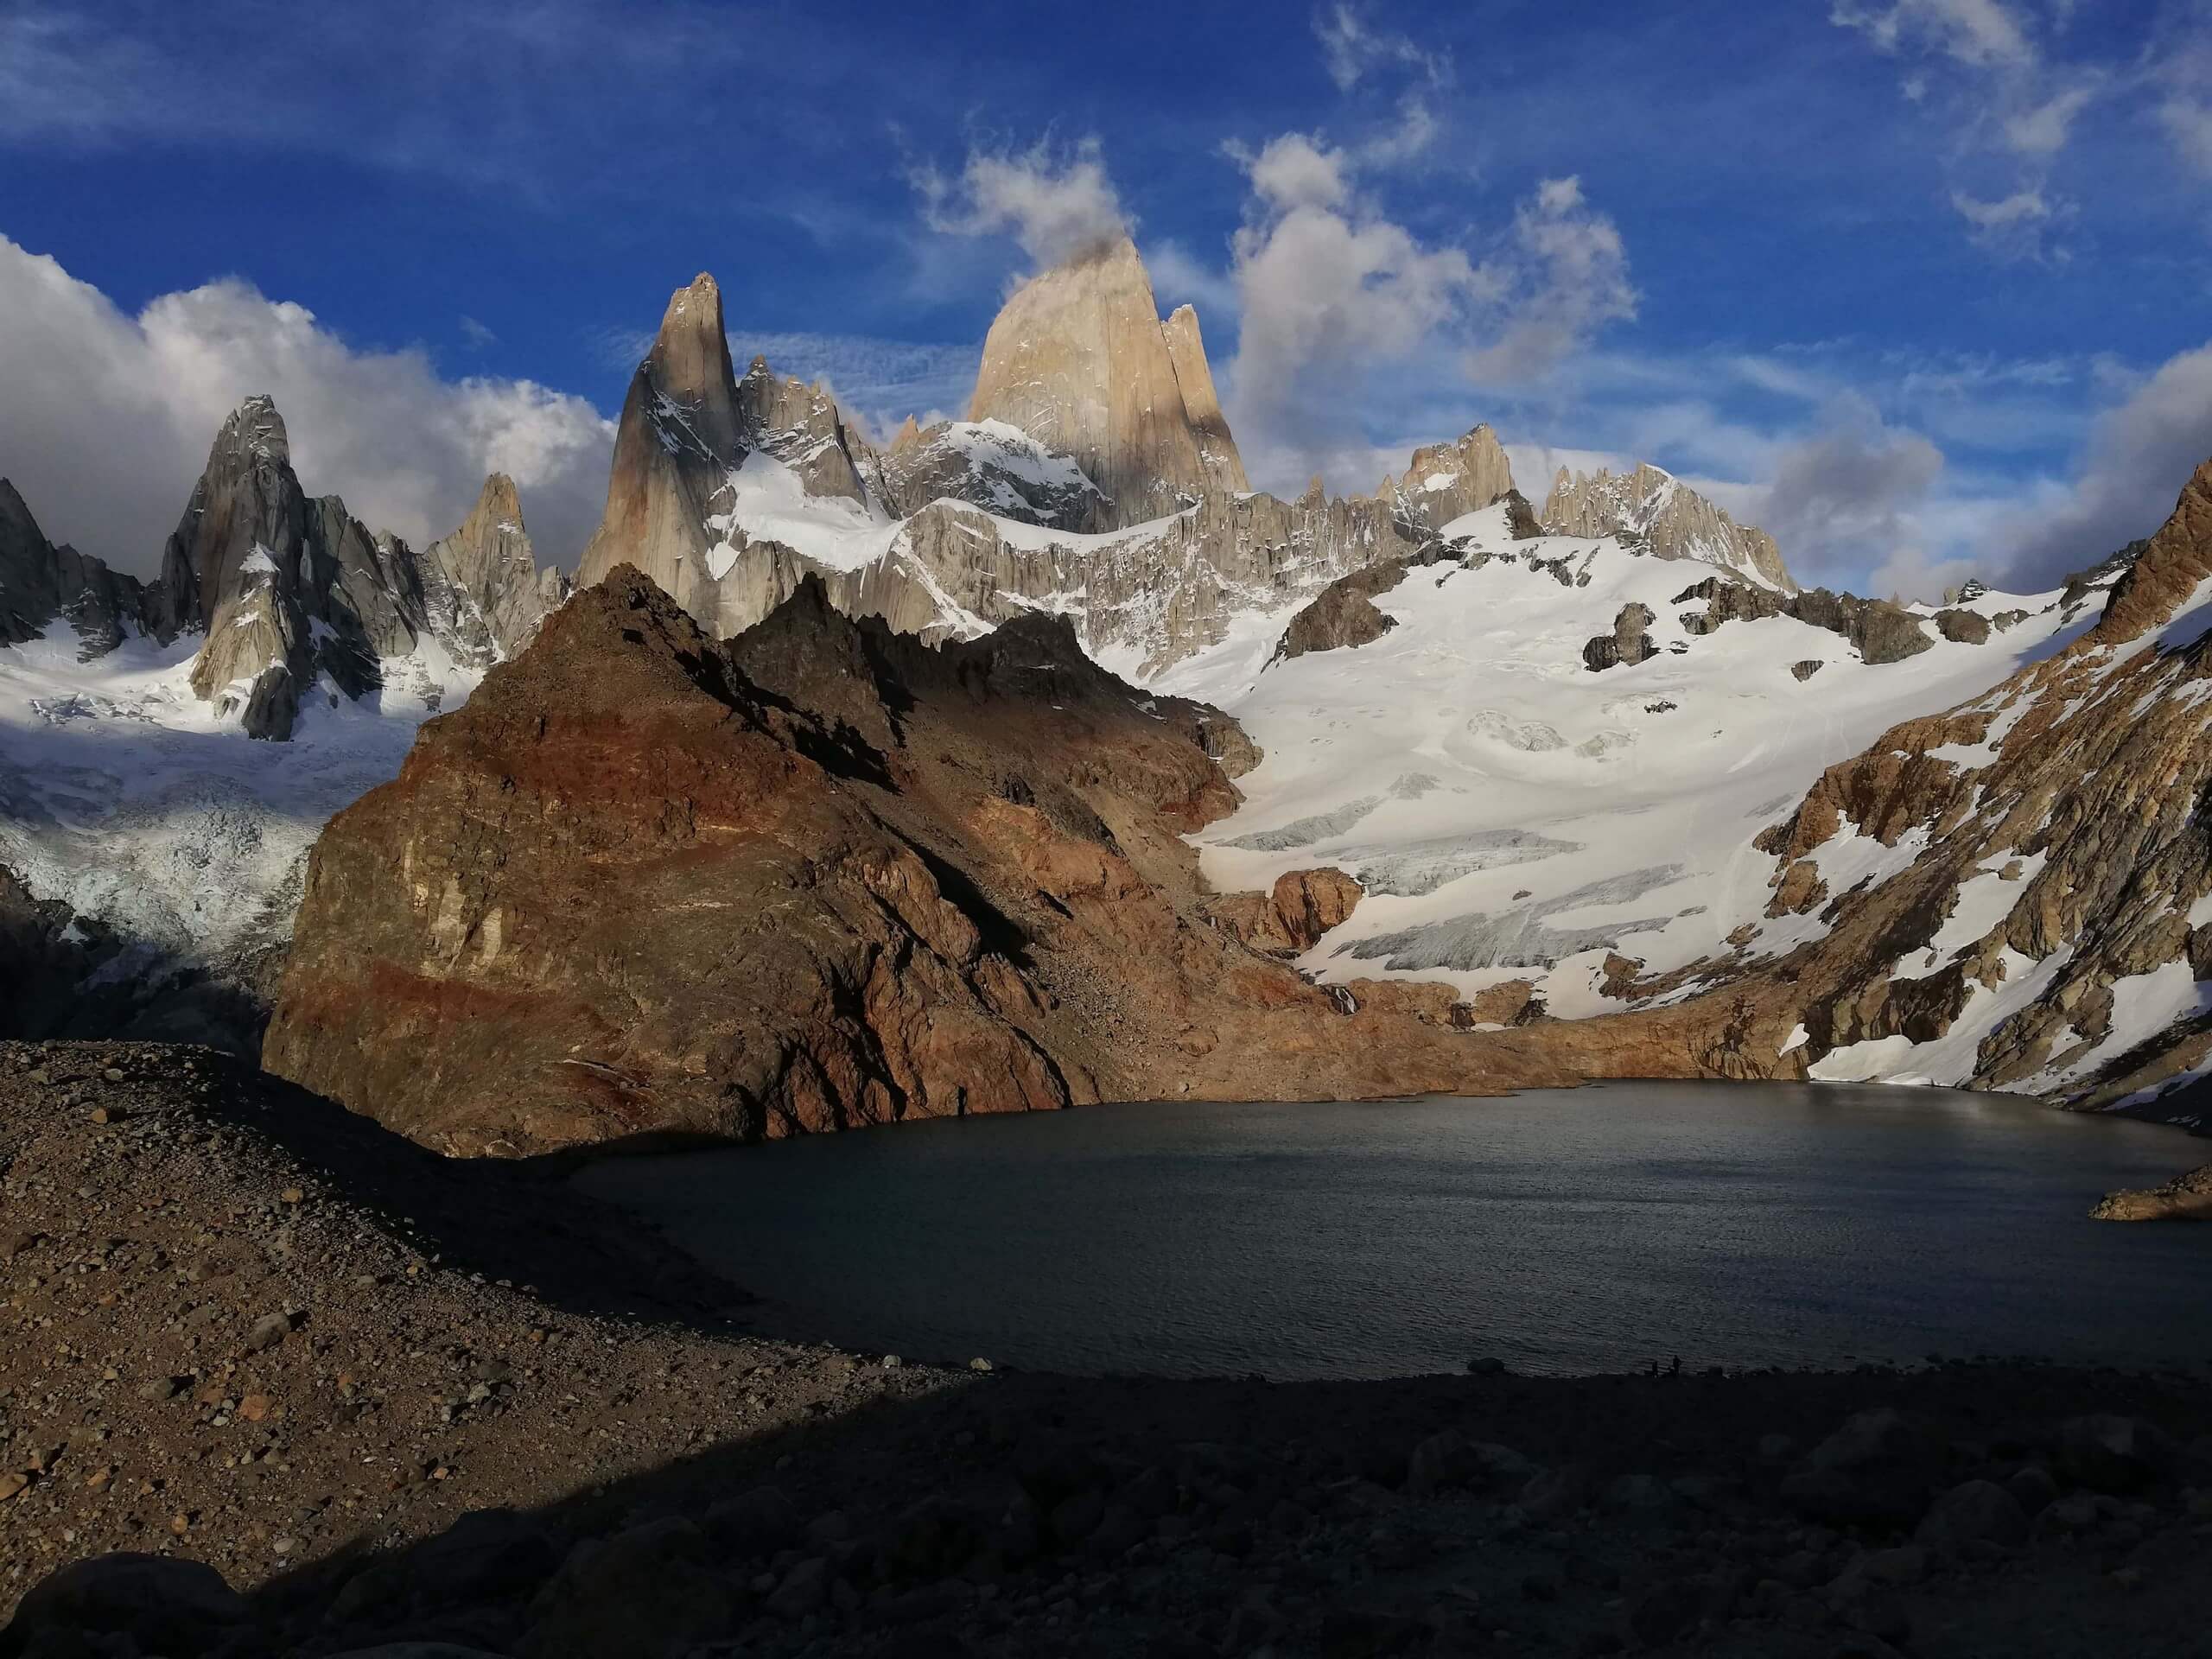 Mountains in Patagonia